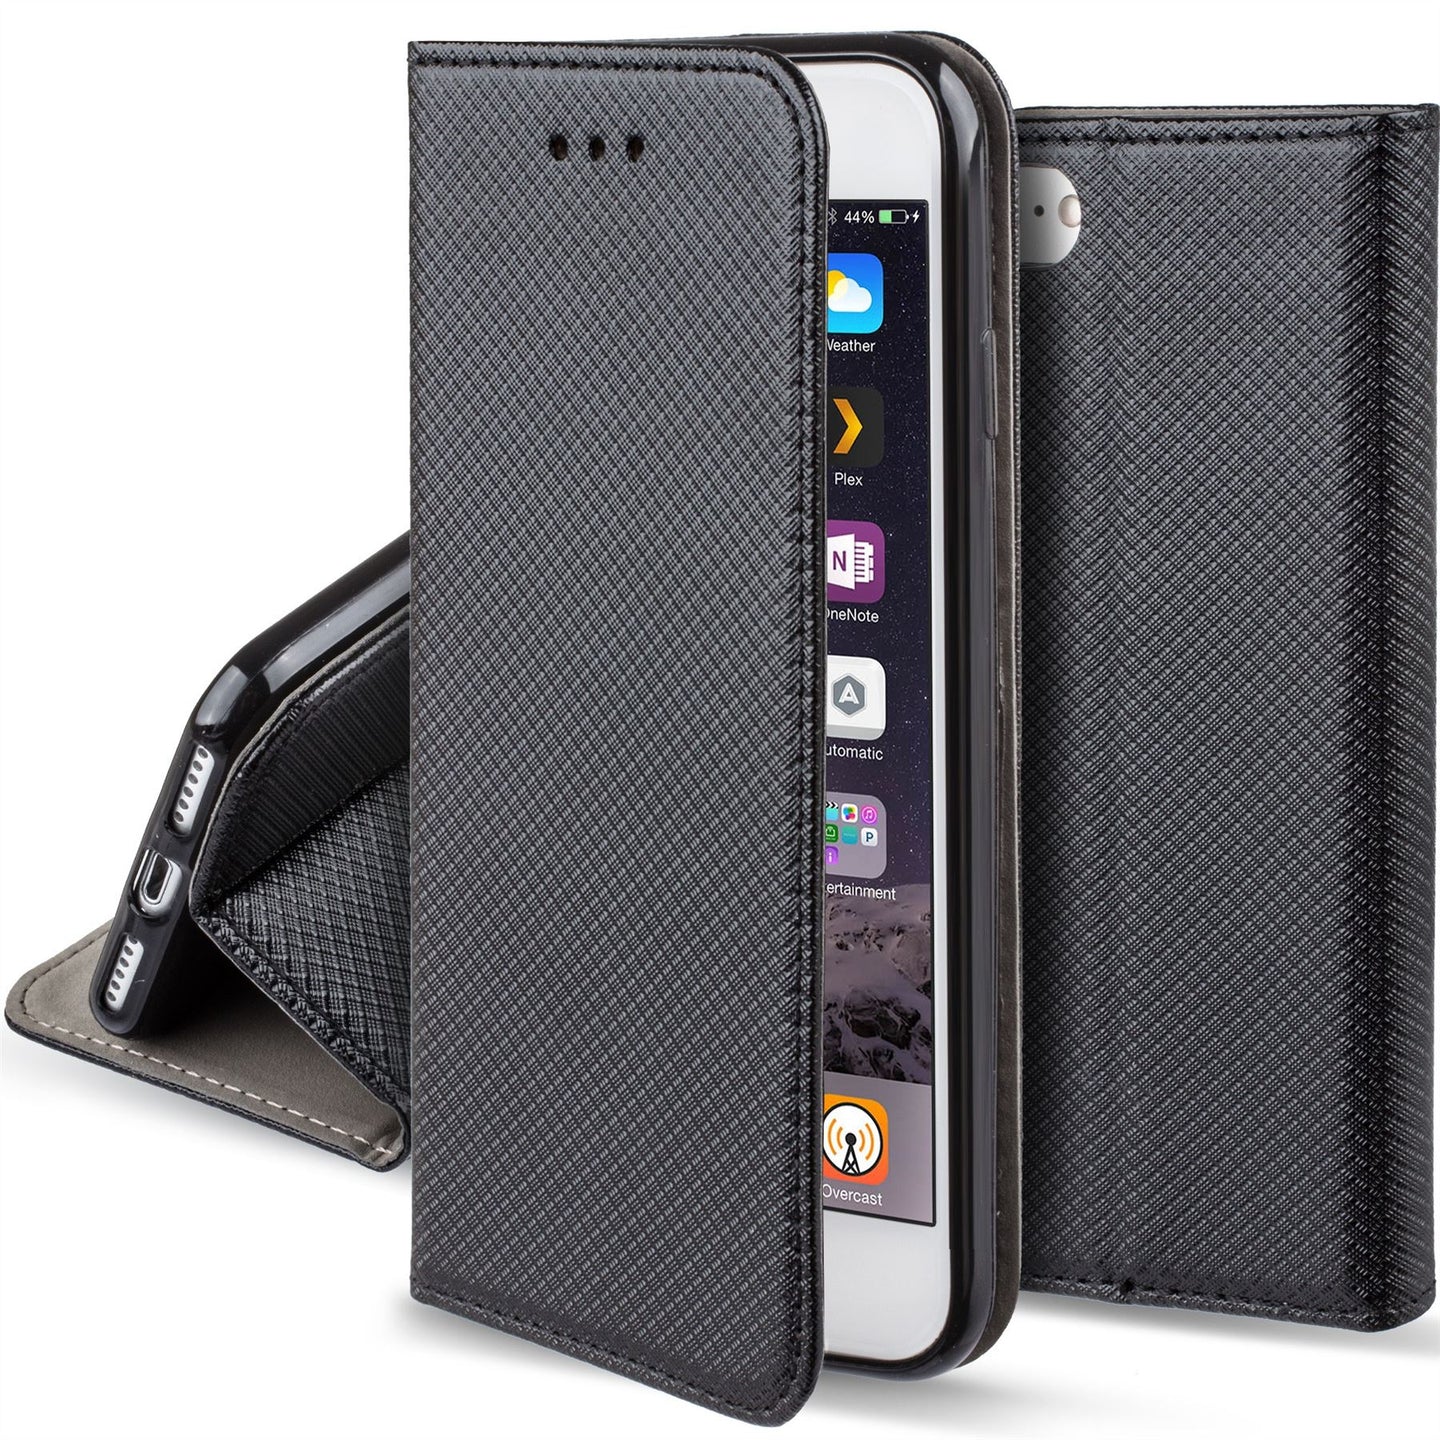 Moozy Case Flip Cover for iPhone 6s, iPhone 6, Black - Smart Magnetic Flip Case with Card Holder and Stand